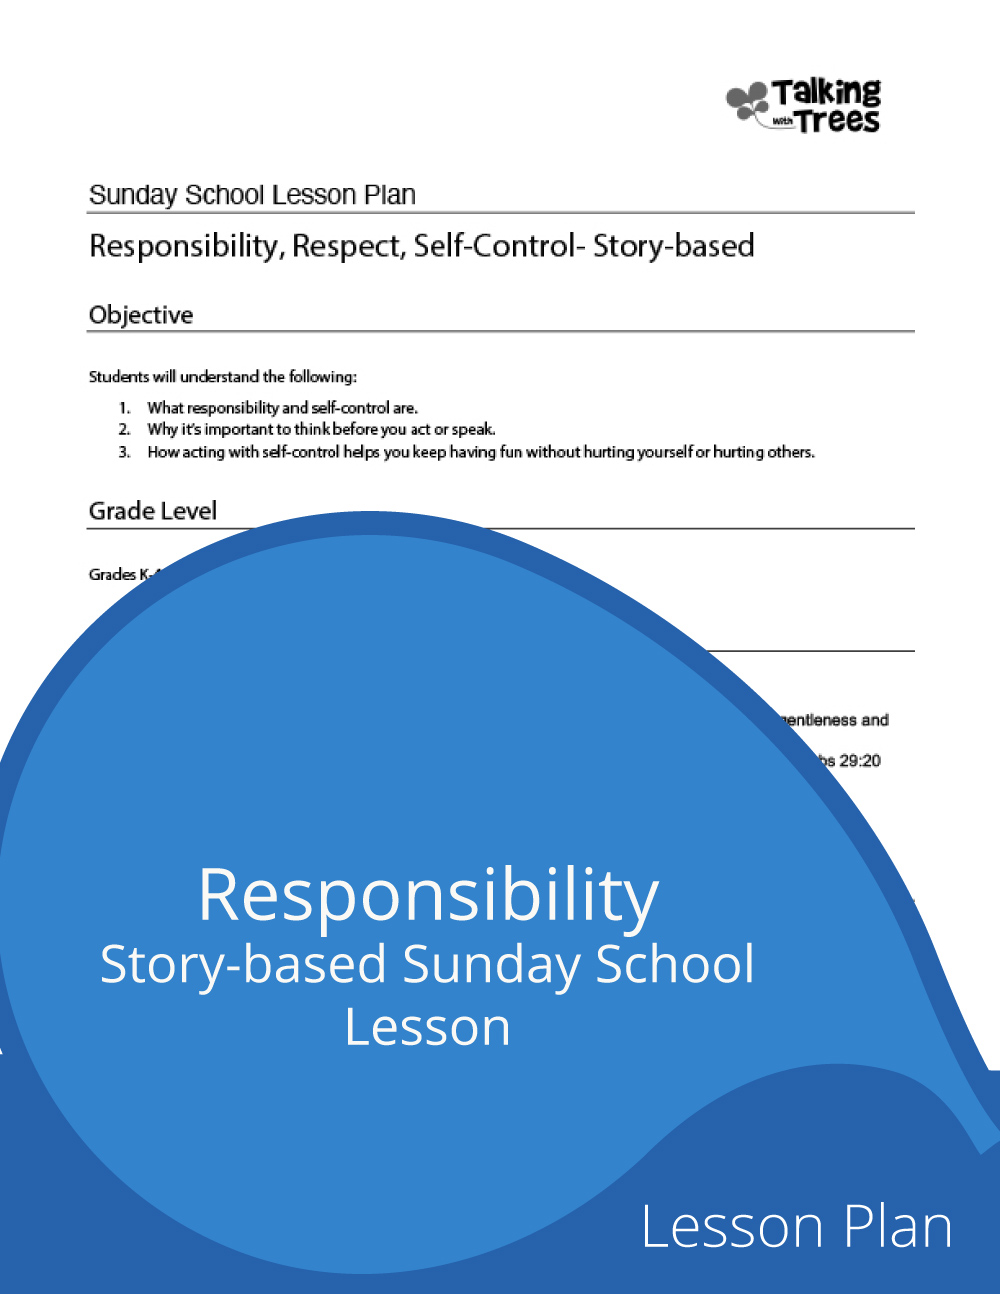 What if? a Reponsibility and Respect Lesson Plan for Sunday School / Youth Groups